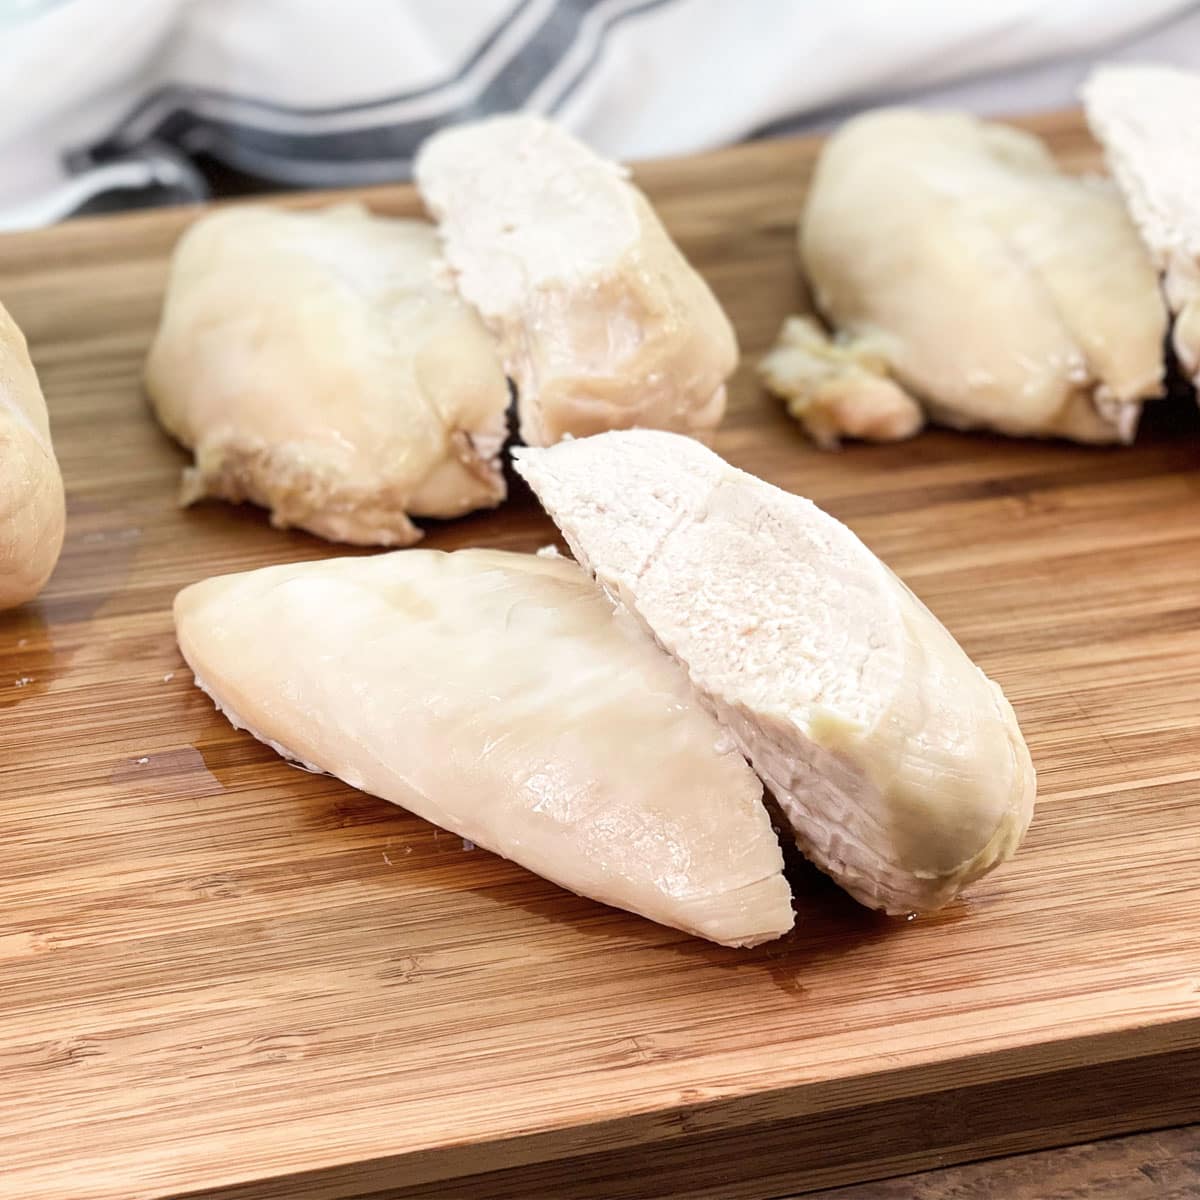 several chicken breasts on a wooden cutting board